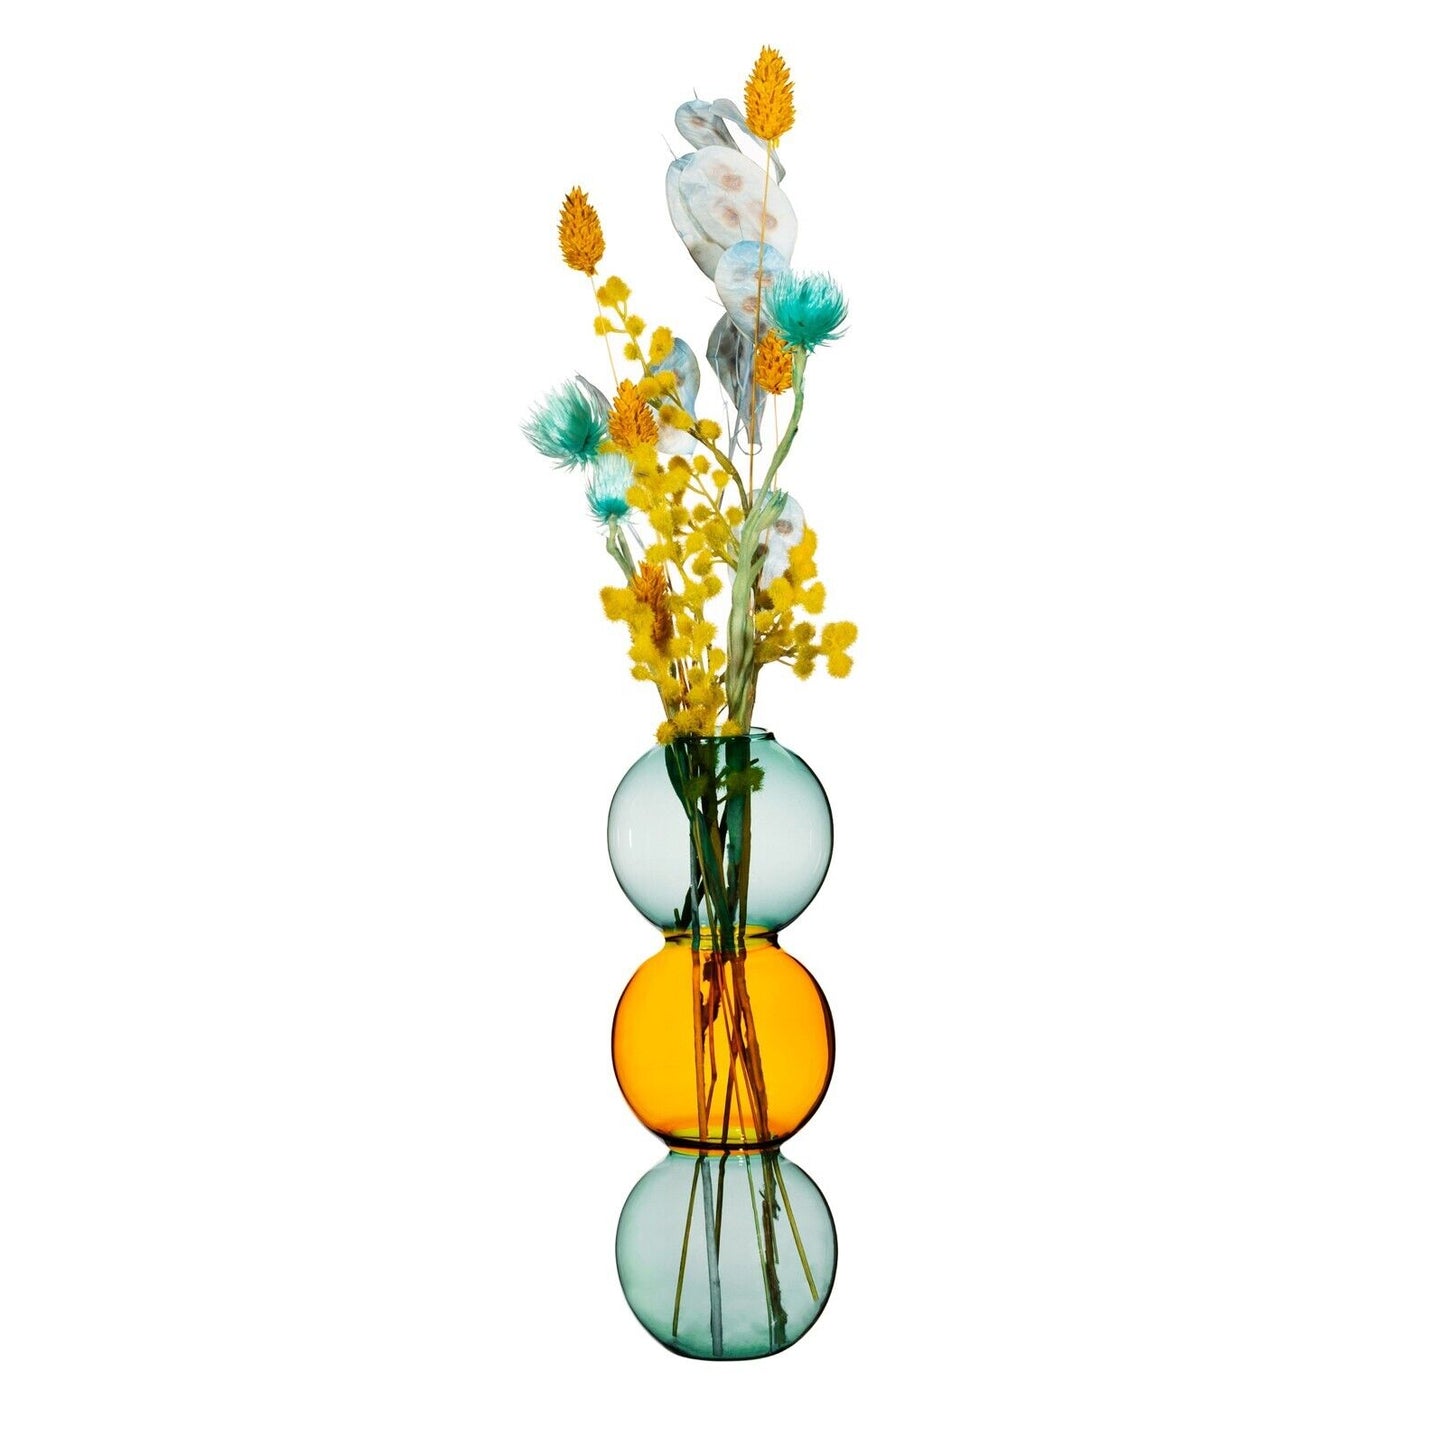 22cm Tall Glass Bubble Vase Home Decor Flowers Buds Vase 3 Tiered Vase 